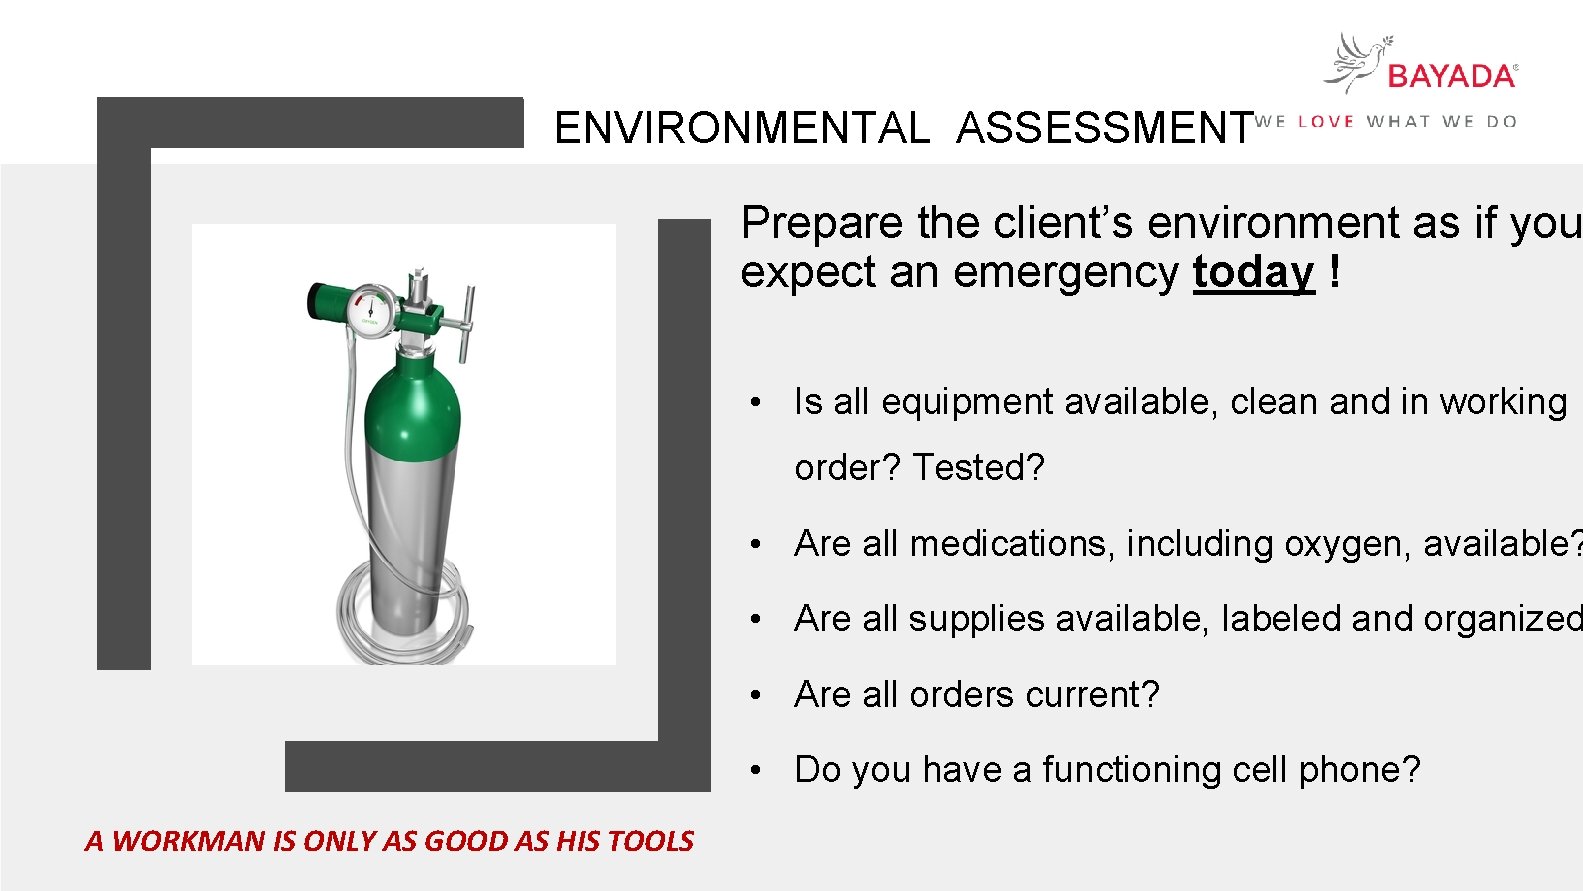 ENVIRONMENTAL ASSESSMENT Prepare the client’s environment as if you expect an emergency today !